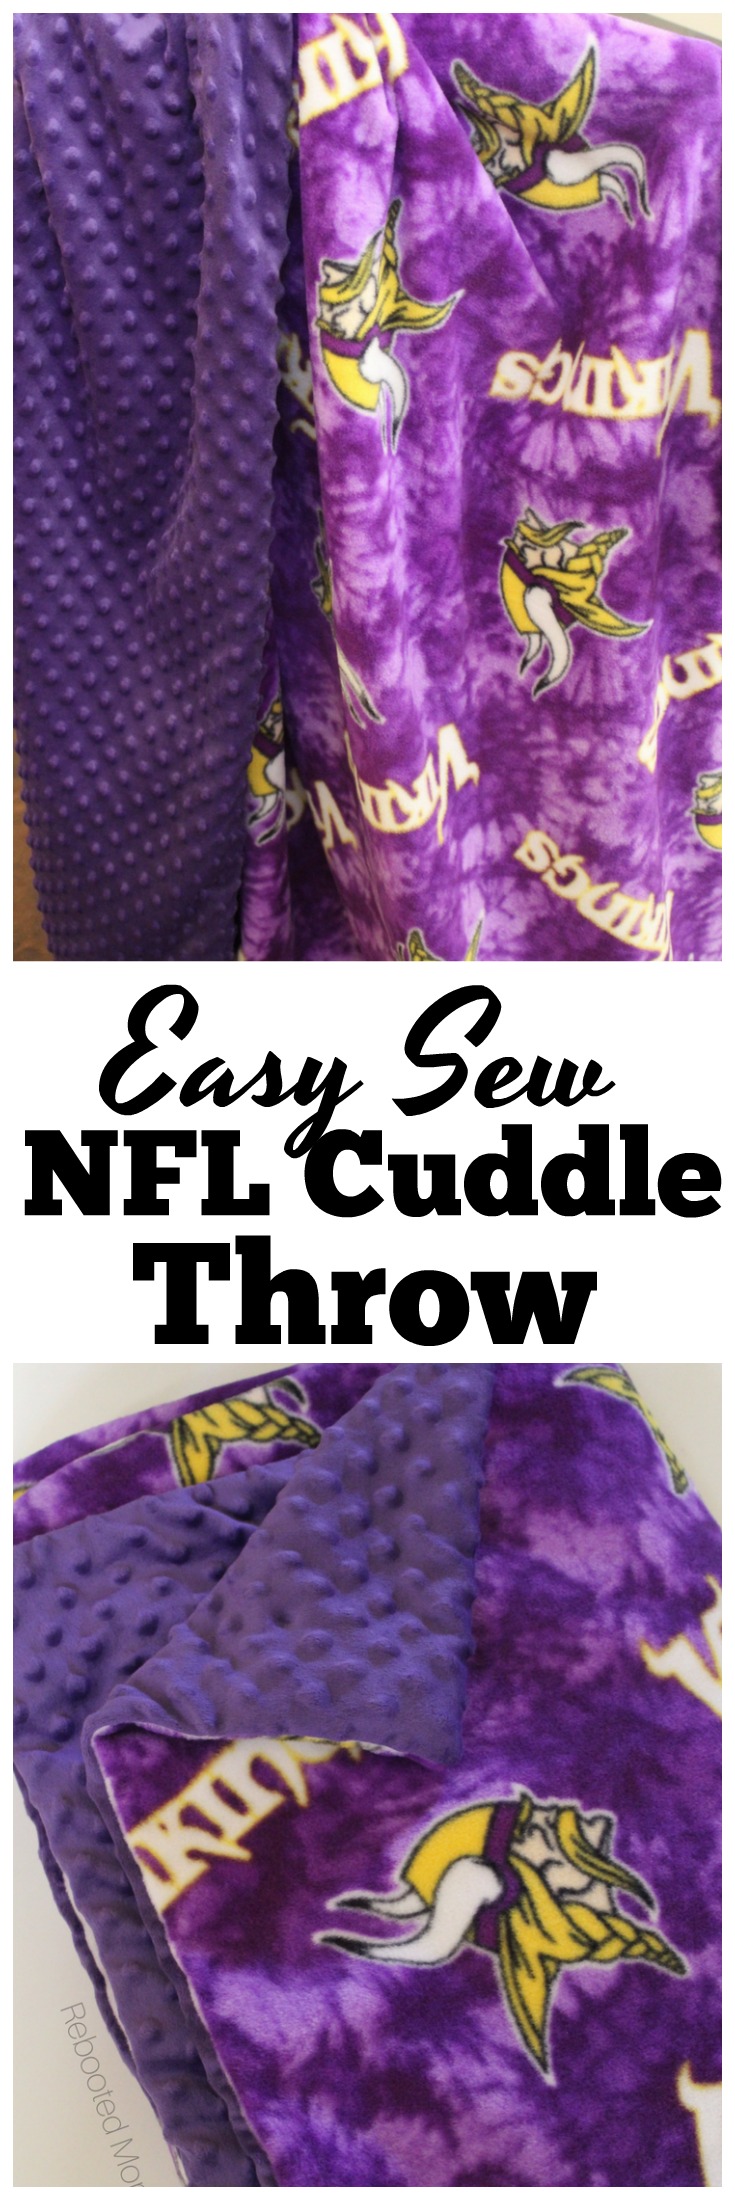 This easy sew NFL cuddle blanket is the perfect handmade gift for a true football fan, and can be sewed in less than an hour. #Football #Sewing #Gift #Blanket